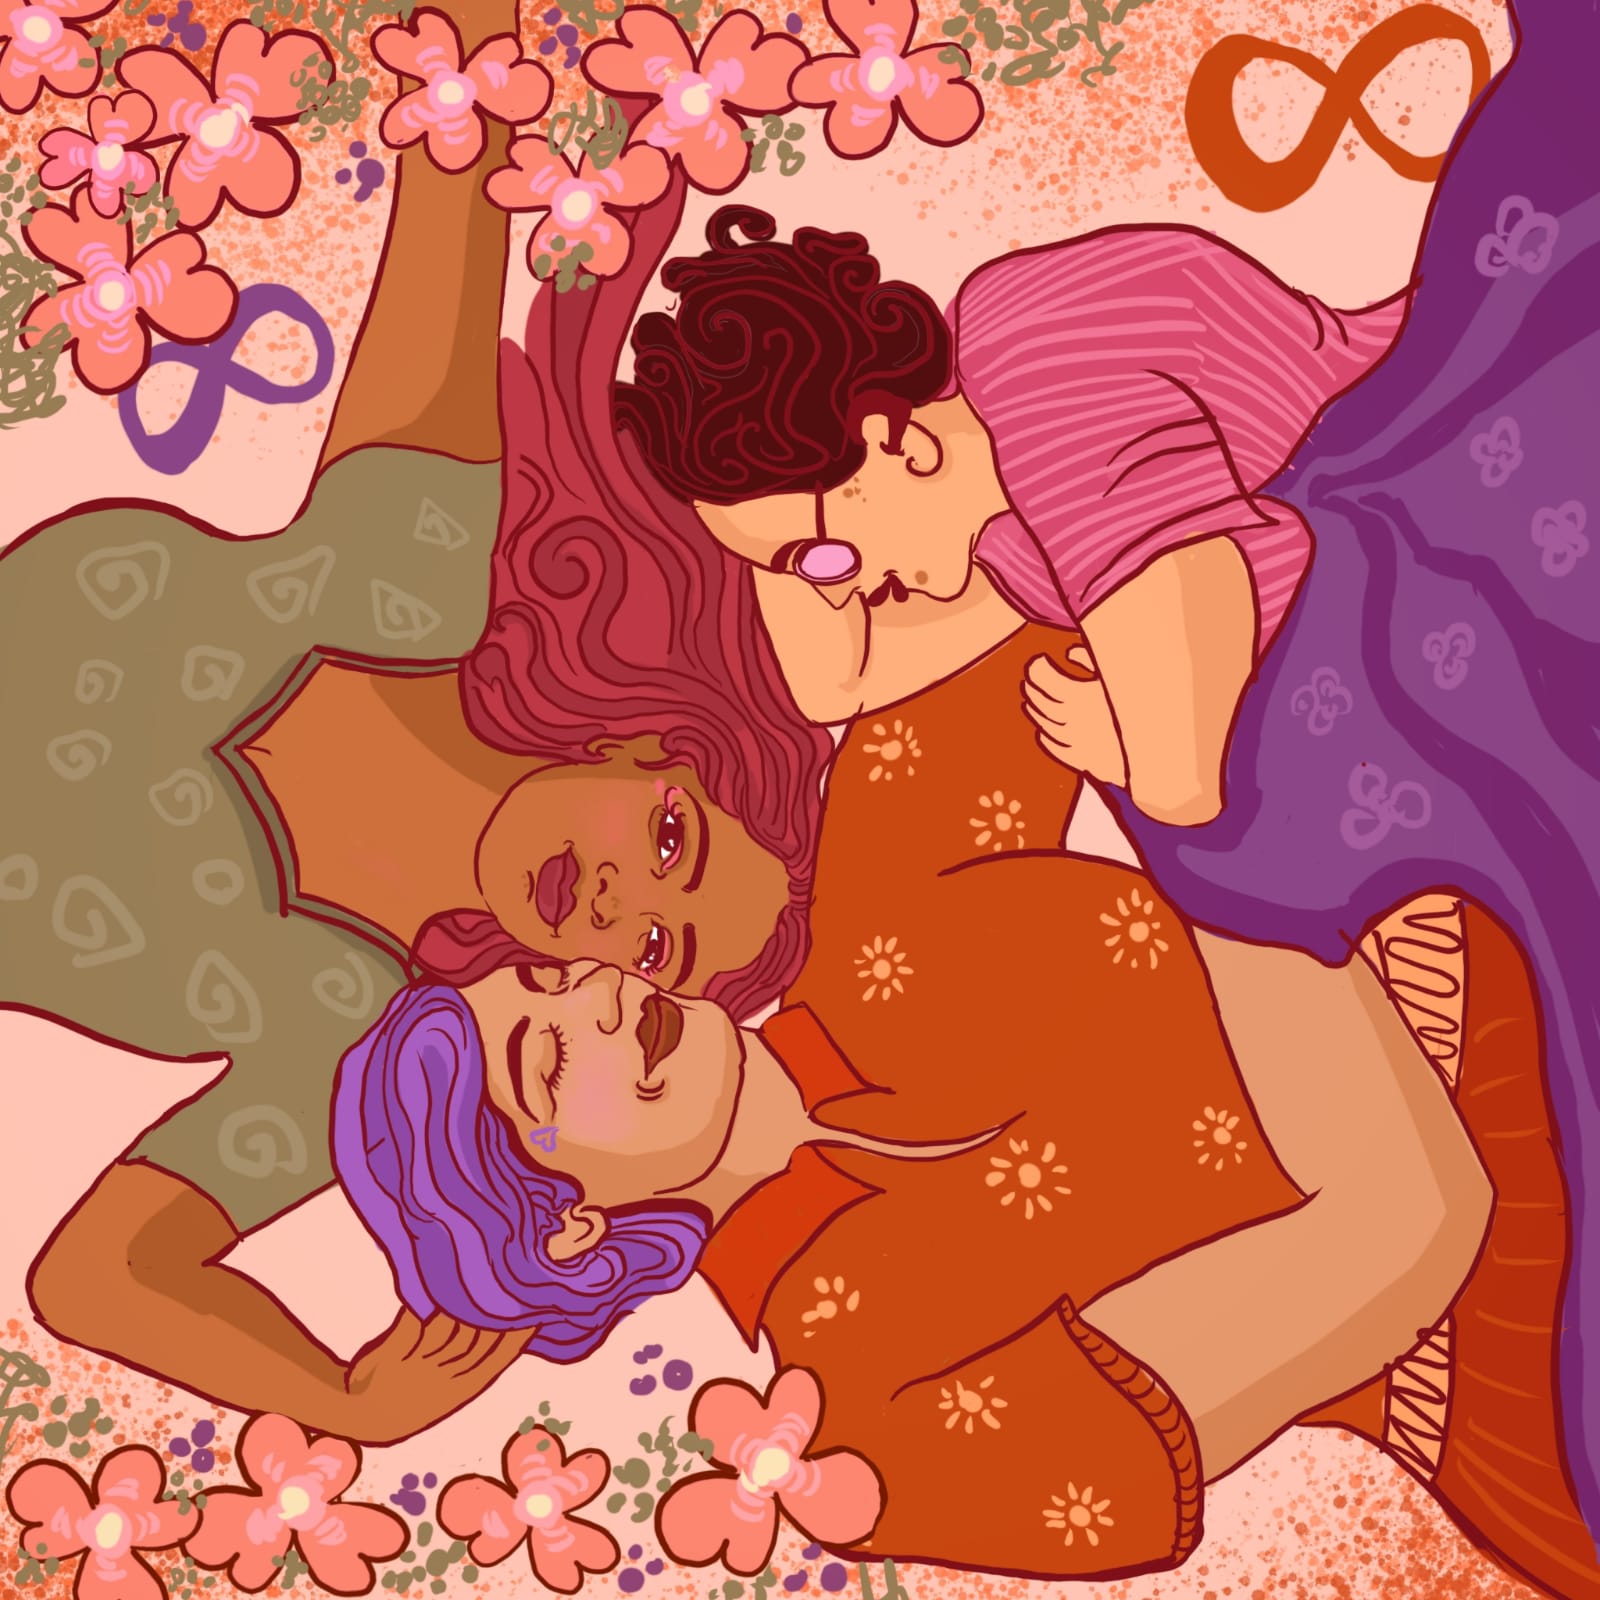 Having Disabled Queer Friends: More Self-Love And More Healing